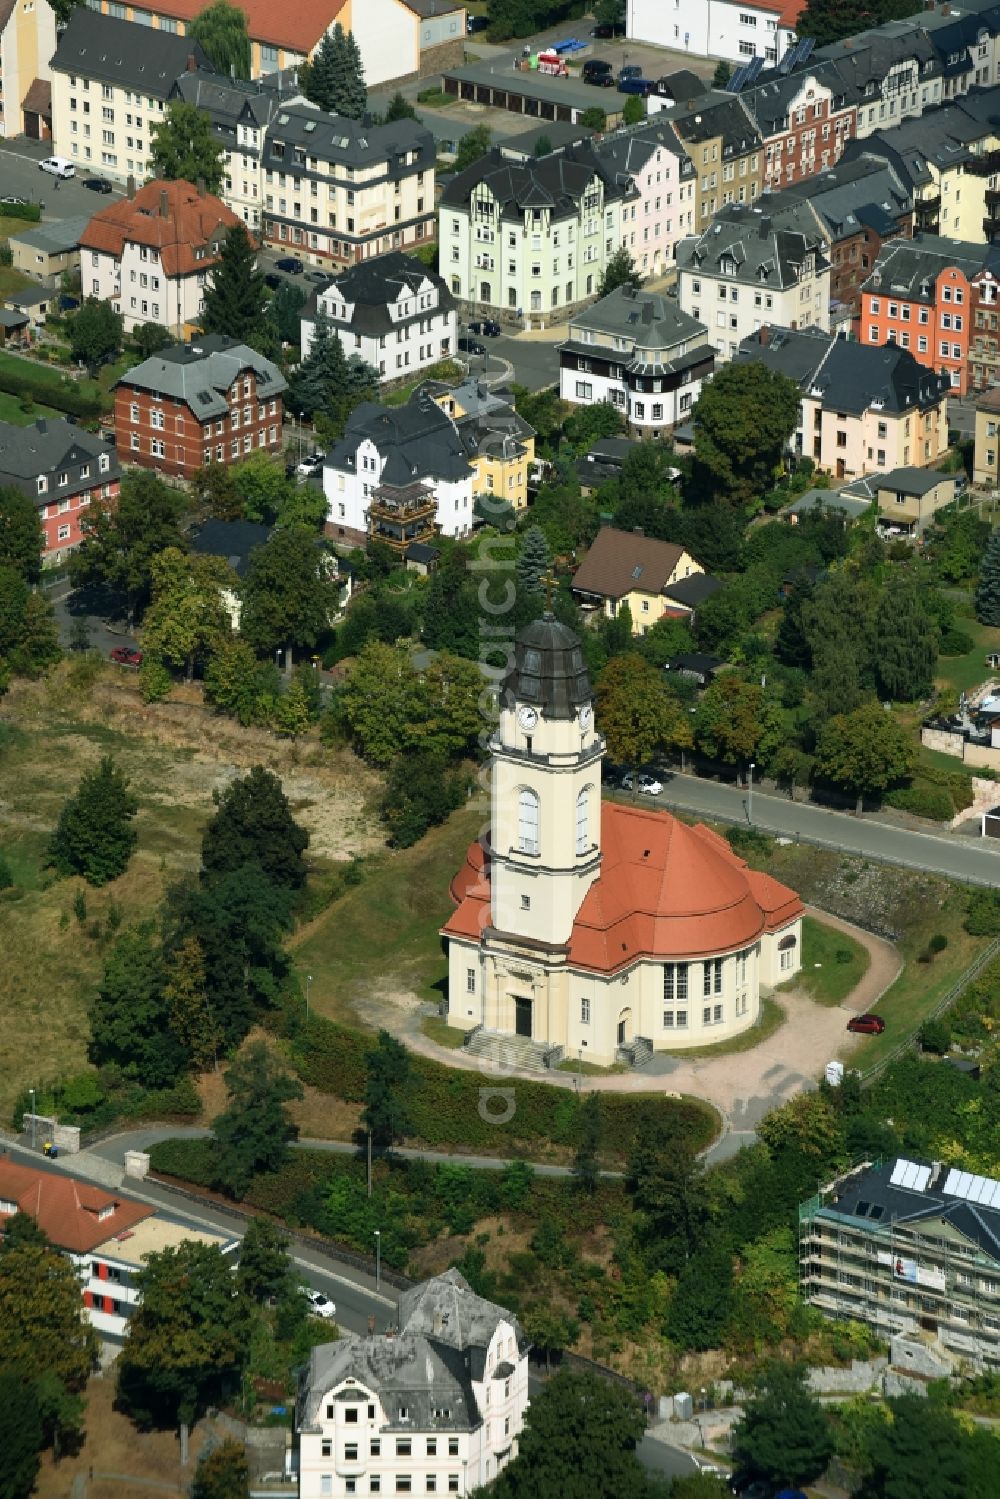 Aerial image Aue - Church building of the parochial community Aue-Zelle on Geschwister-Scholl-Strasse in Aue in the state of Saxony